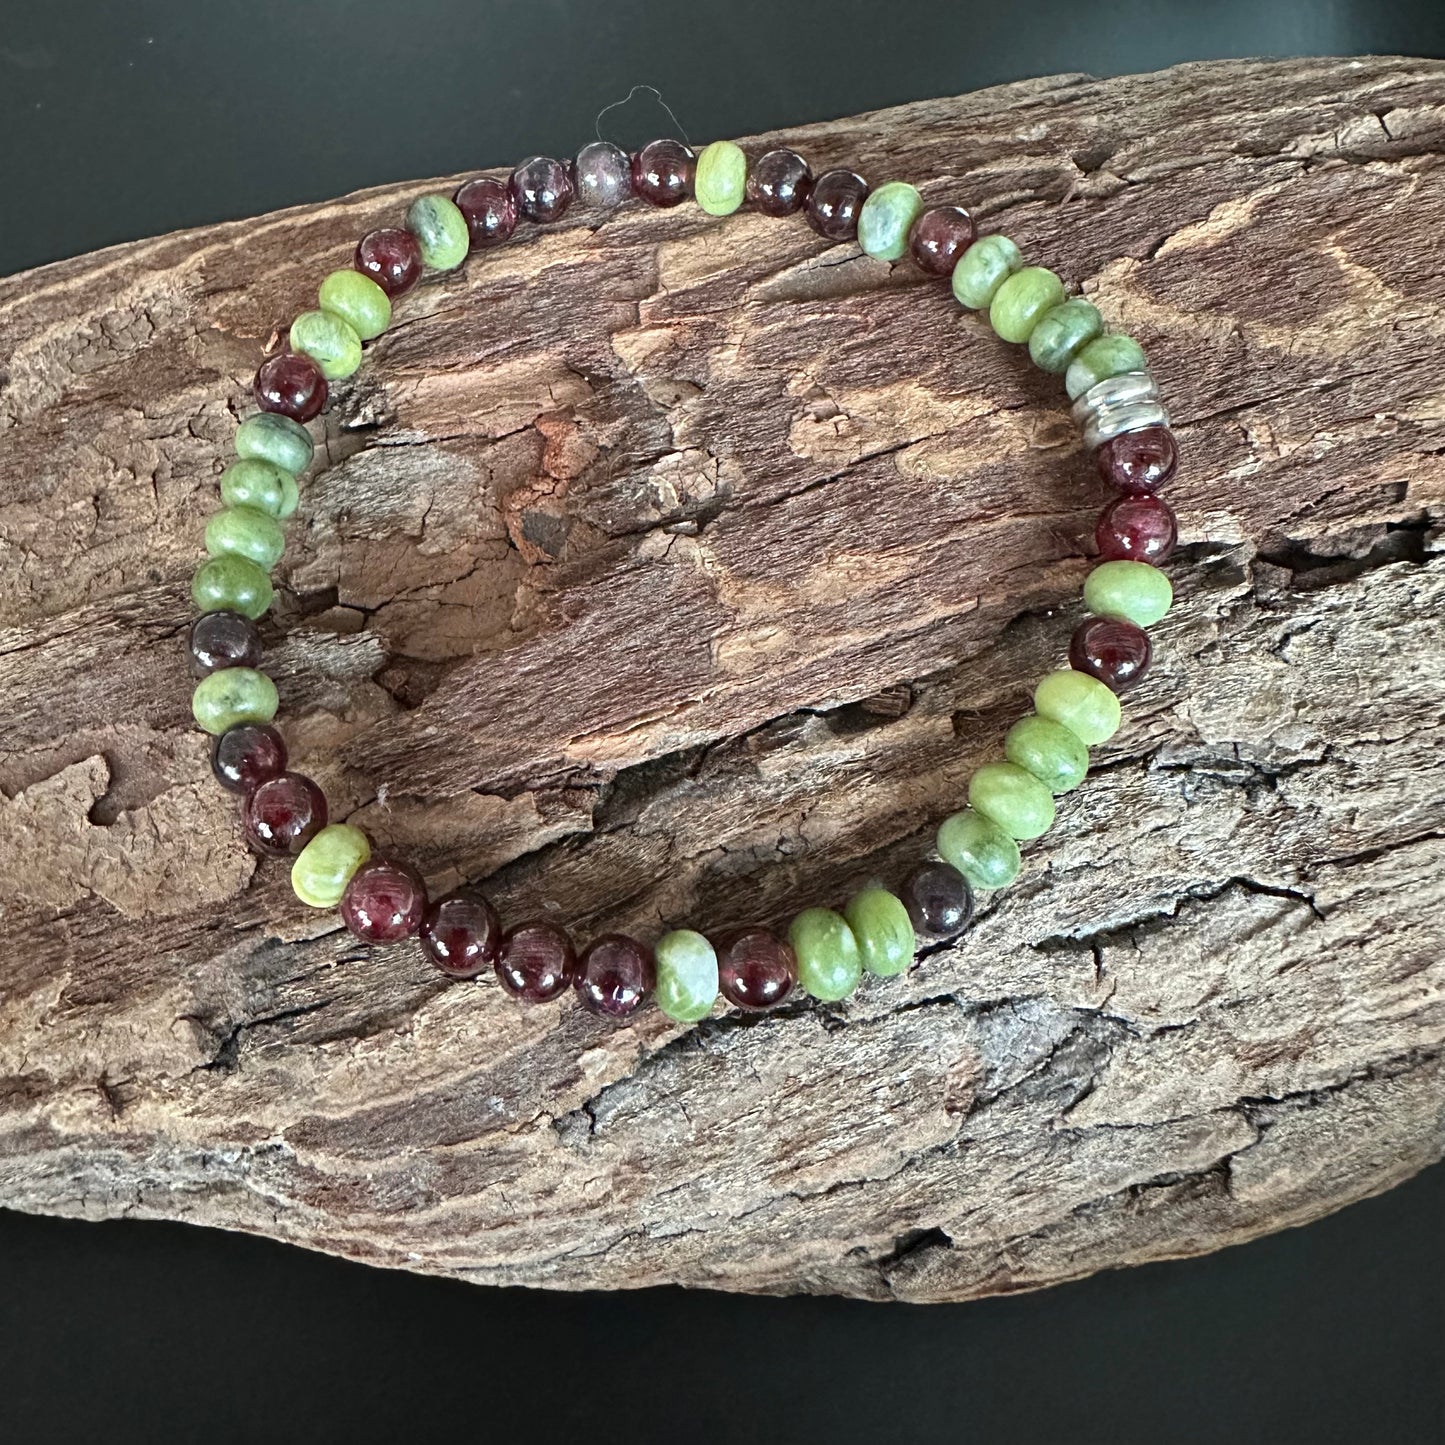 Garnet and Nepherite Jade with Stainless Steel Accents